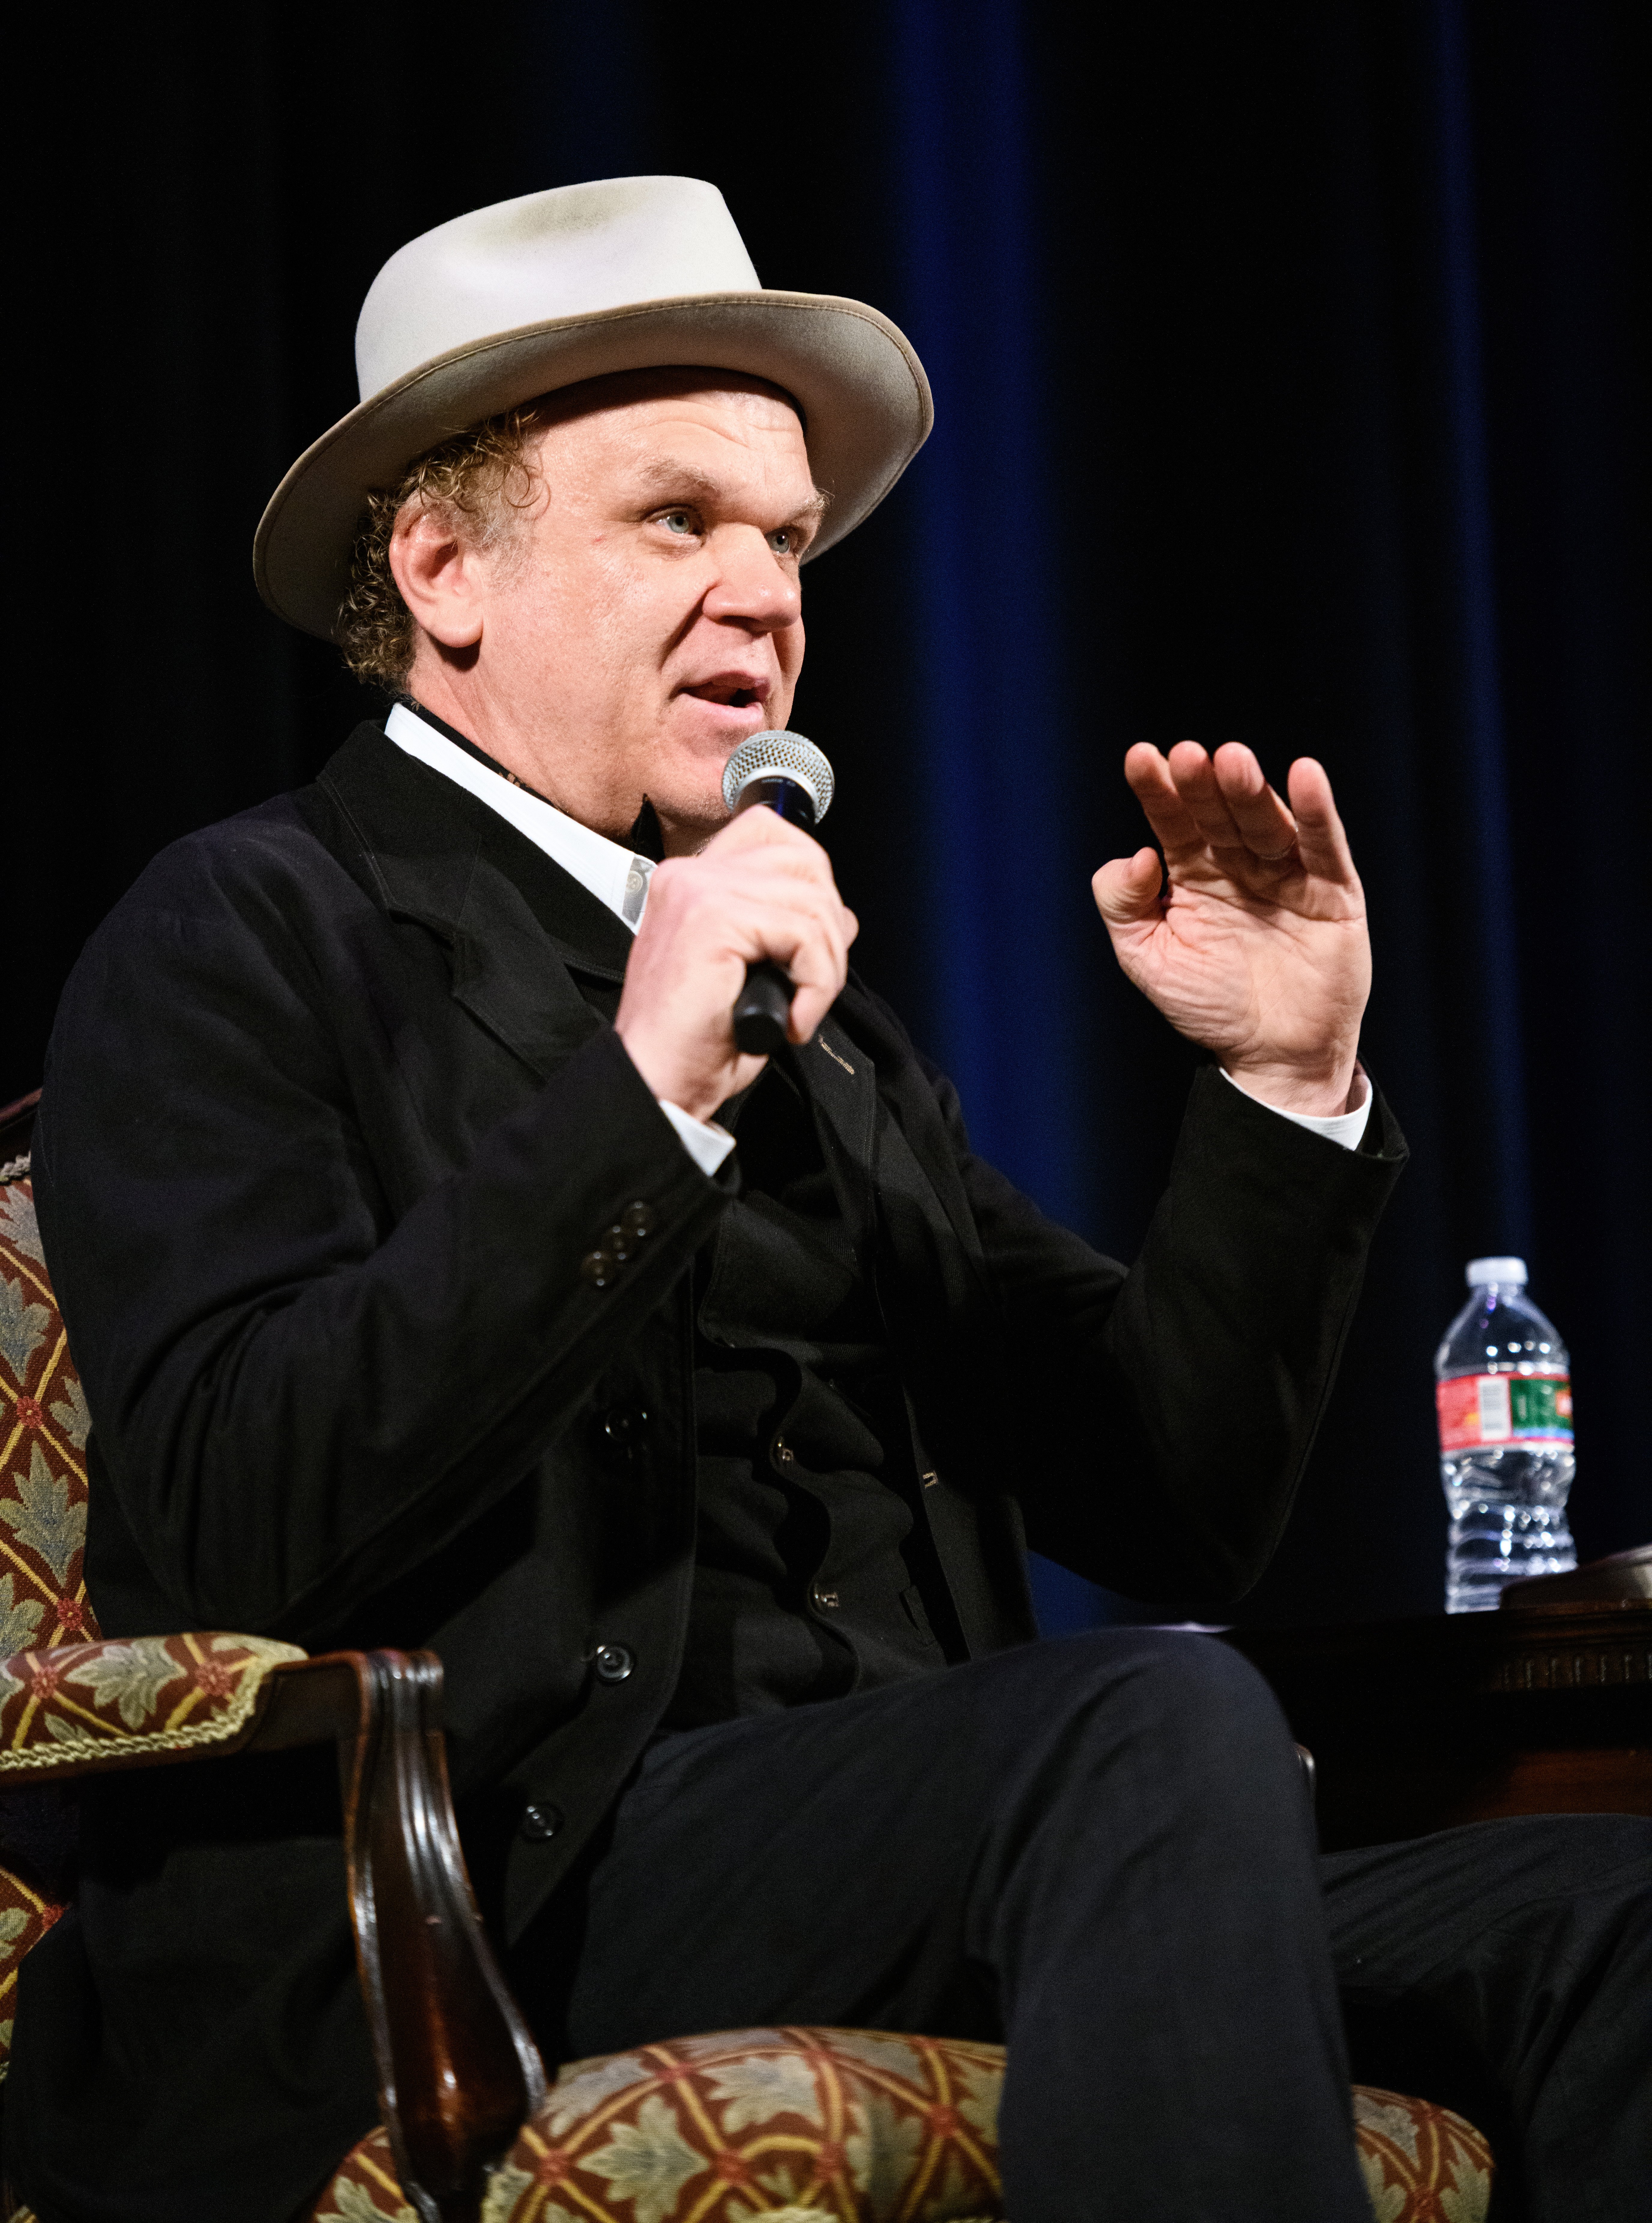 Actor John C. Reilly attends Book Soup's Molly Shannon In Conversation With John C. Reilly event for Shannon's new book "Hello Molly: A Memoir" at the Wilshire Ebell Theatre on April 20, 2022 in Los Angeles, California. | Source: Getty Images